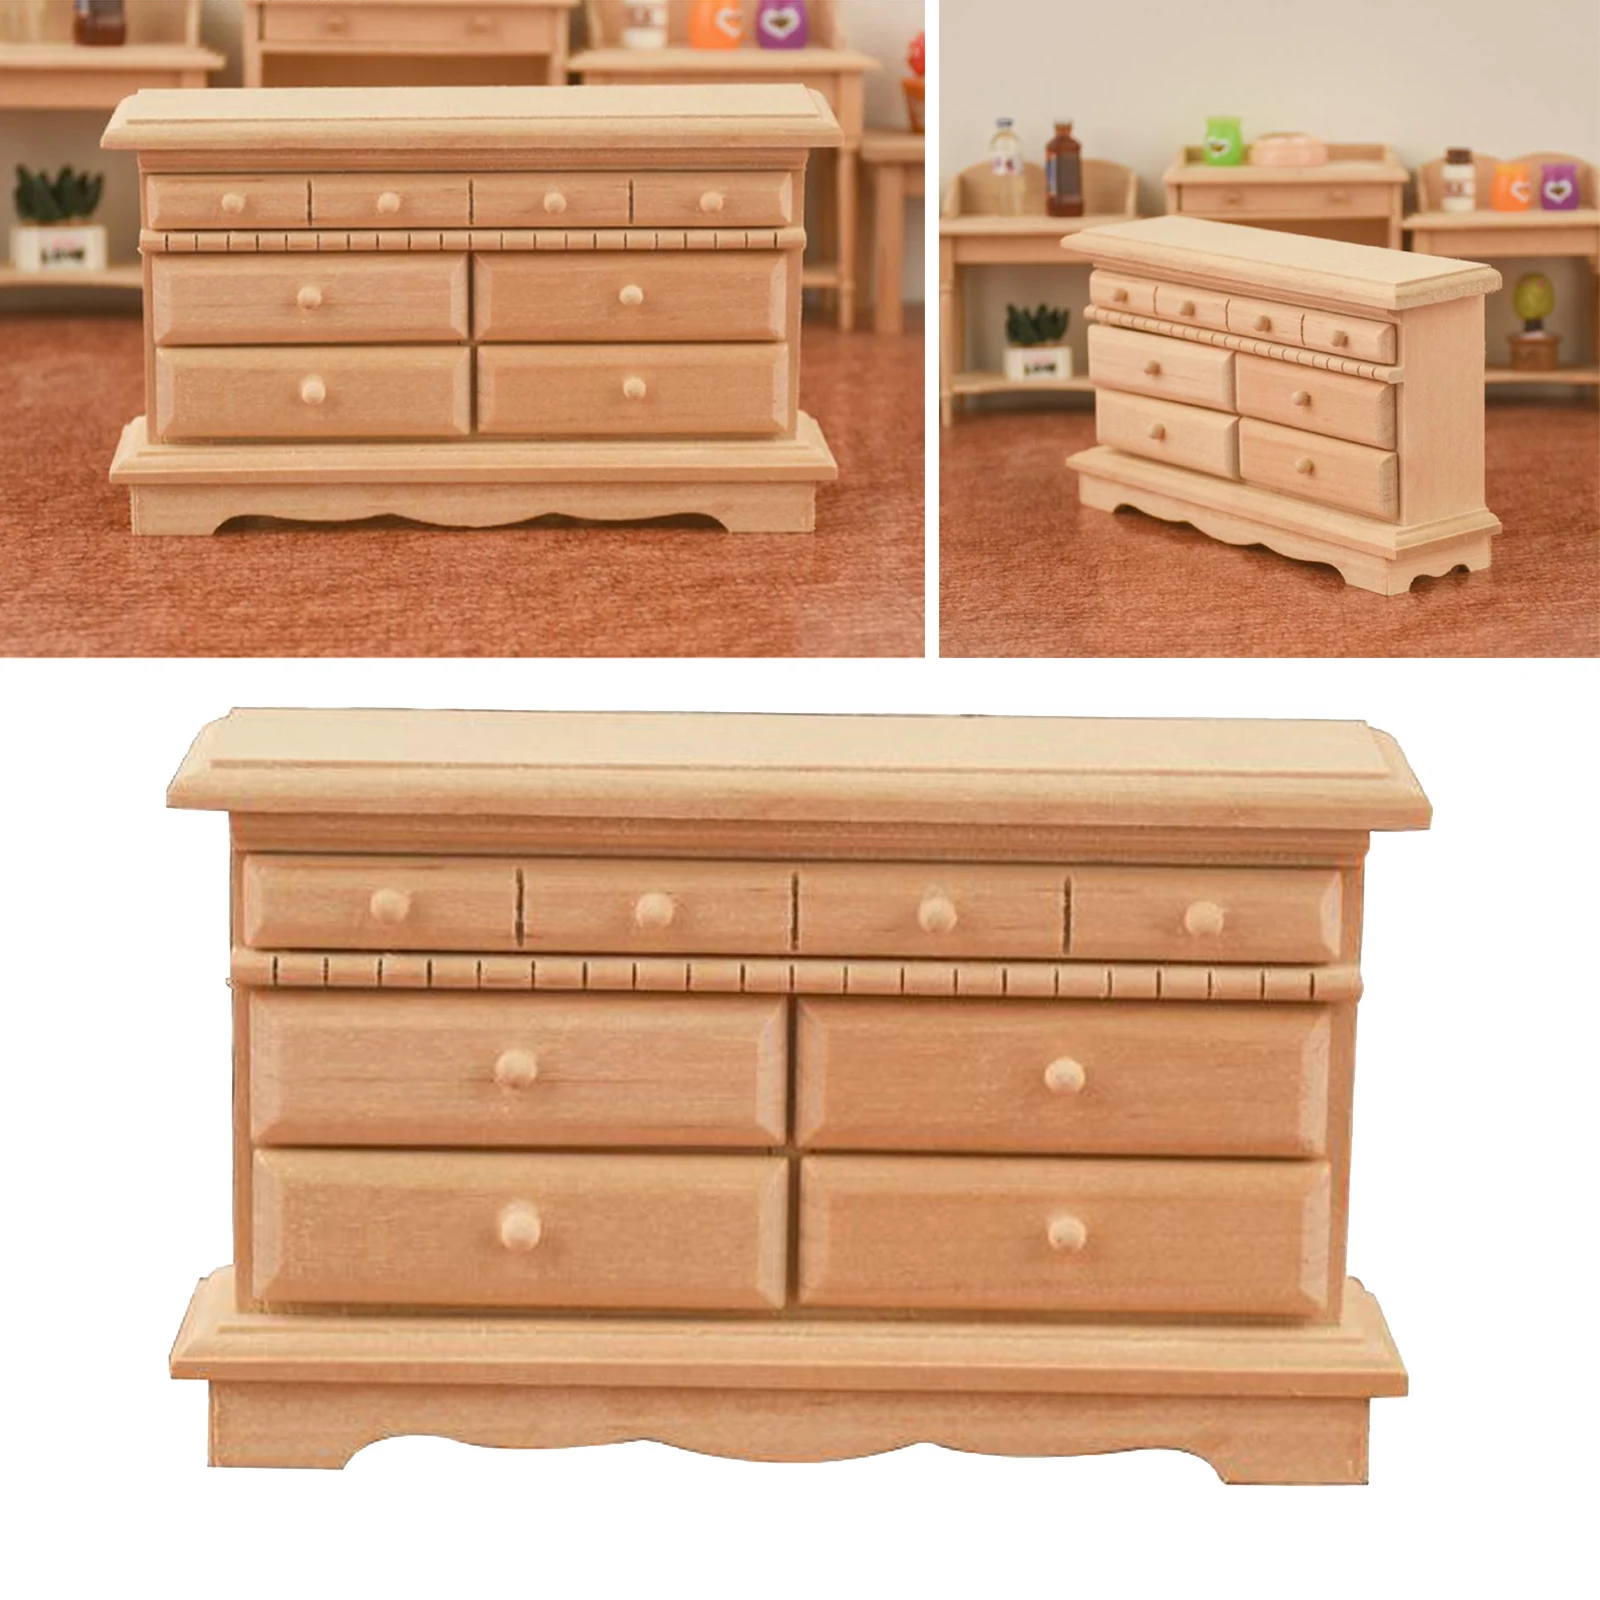 1/12 Doll House Mini Wood Cabinet Simulation Model Living Room Furniture Supplies Scenery Decor